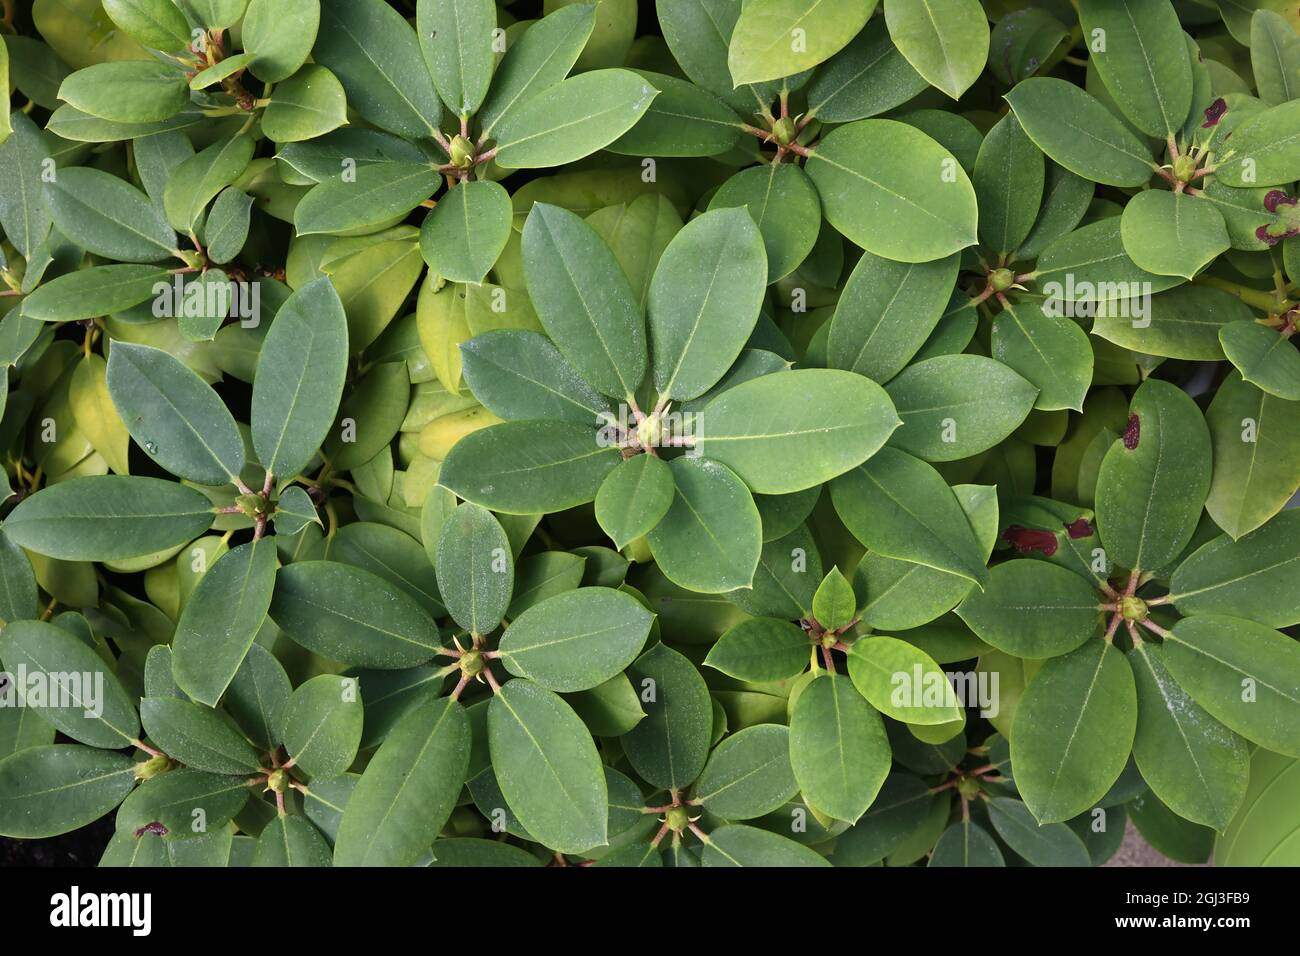 Fresh green leaves of Rhododendron flower tree. Stock Photo